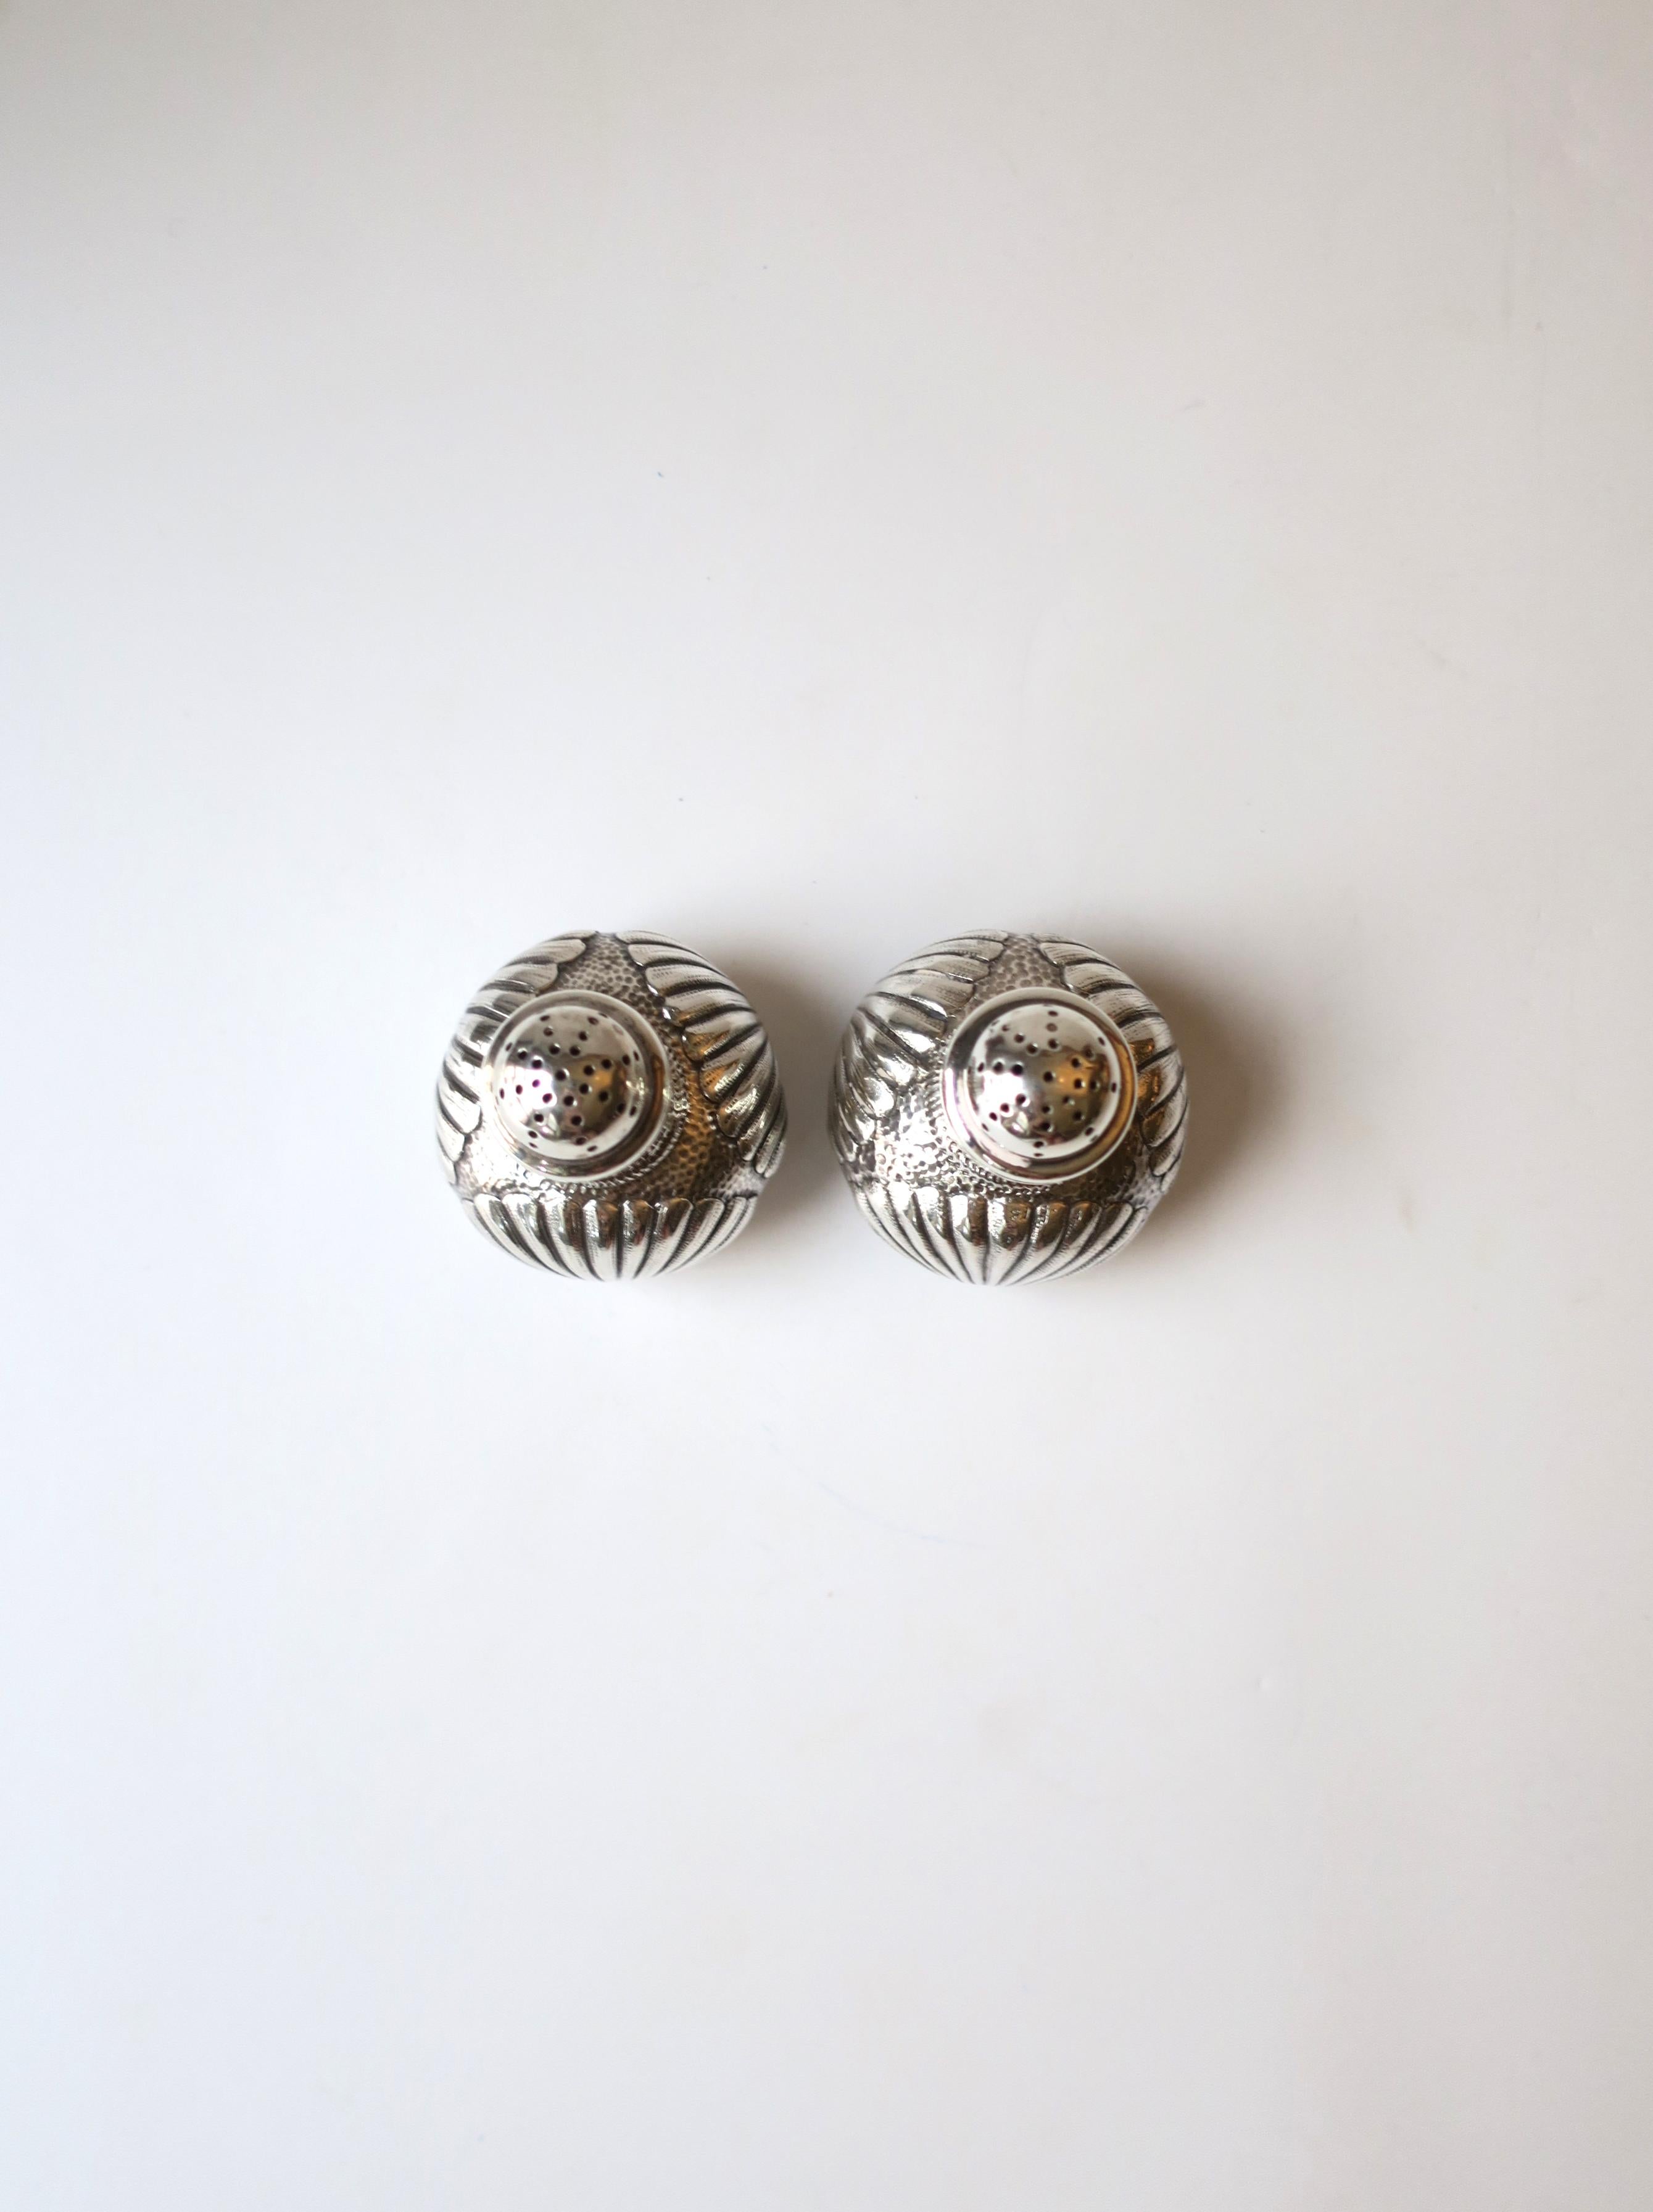 Sterling Silver Salt & Pepper Shakers Scallop Seashell Design by Caldwell, Pair For Sale 3